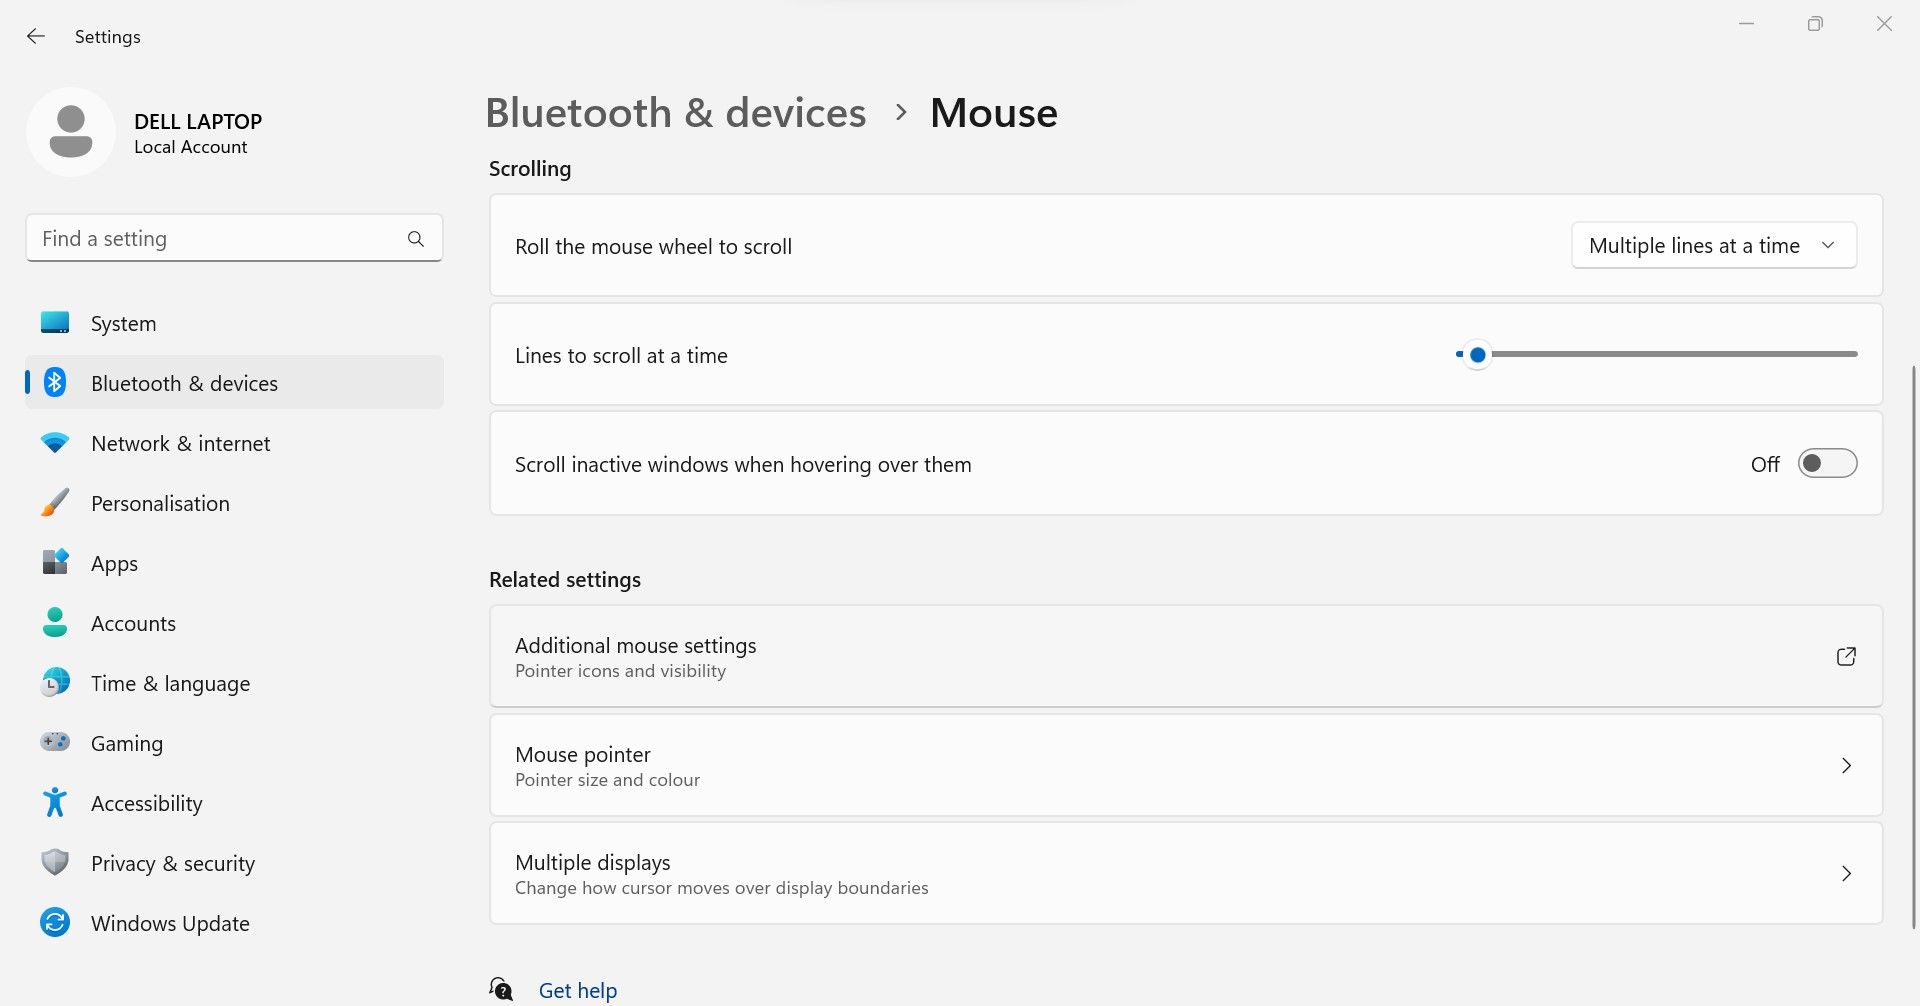 Opening Additional Mouse Settings in the Windows Settings App